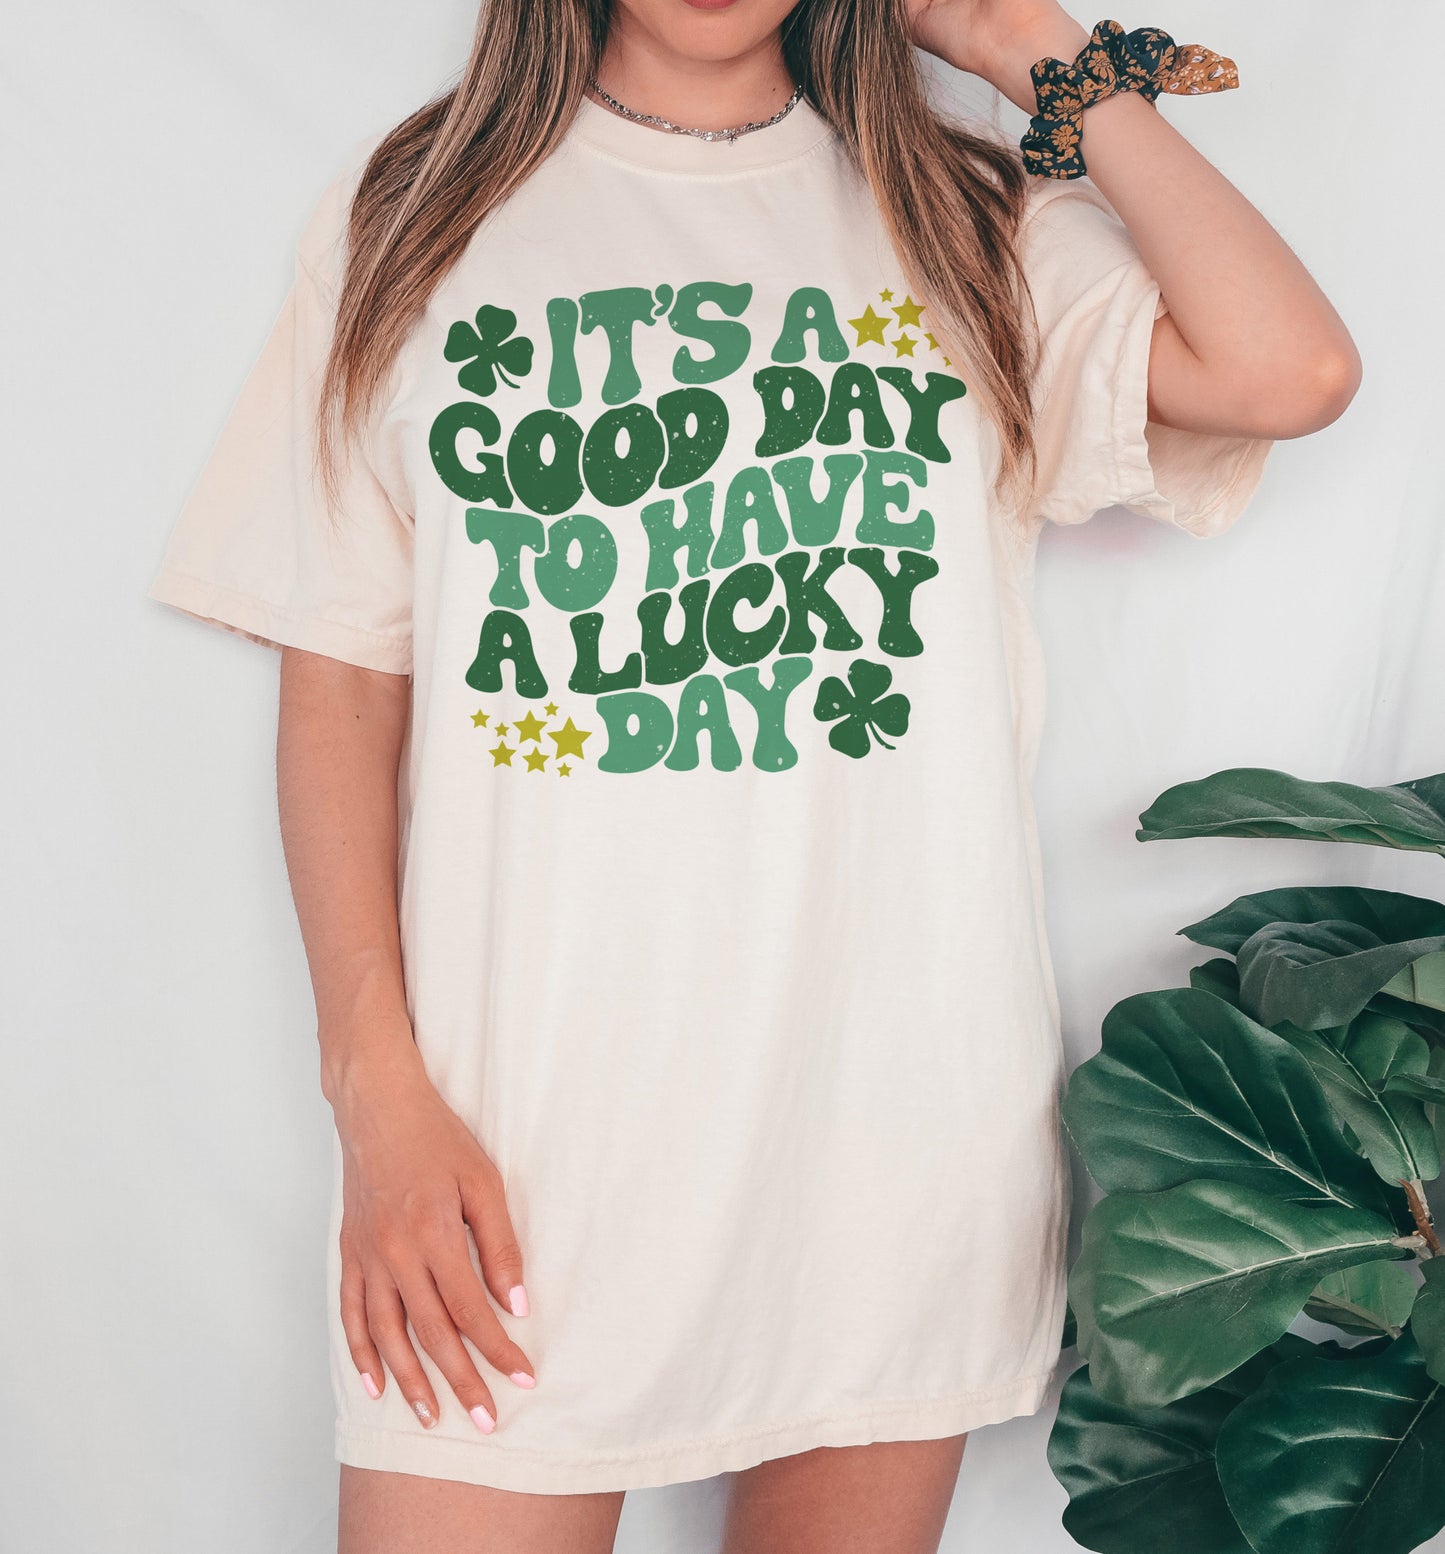 It's A Good Day To Have A Lucky Day Tee/ St. Patricks Day Bella Soft Style or Comfort Colors Tee